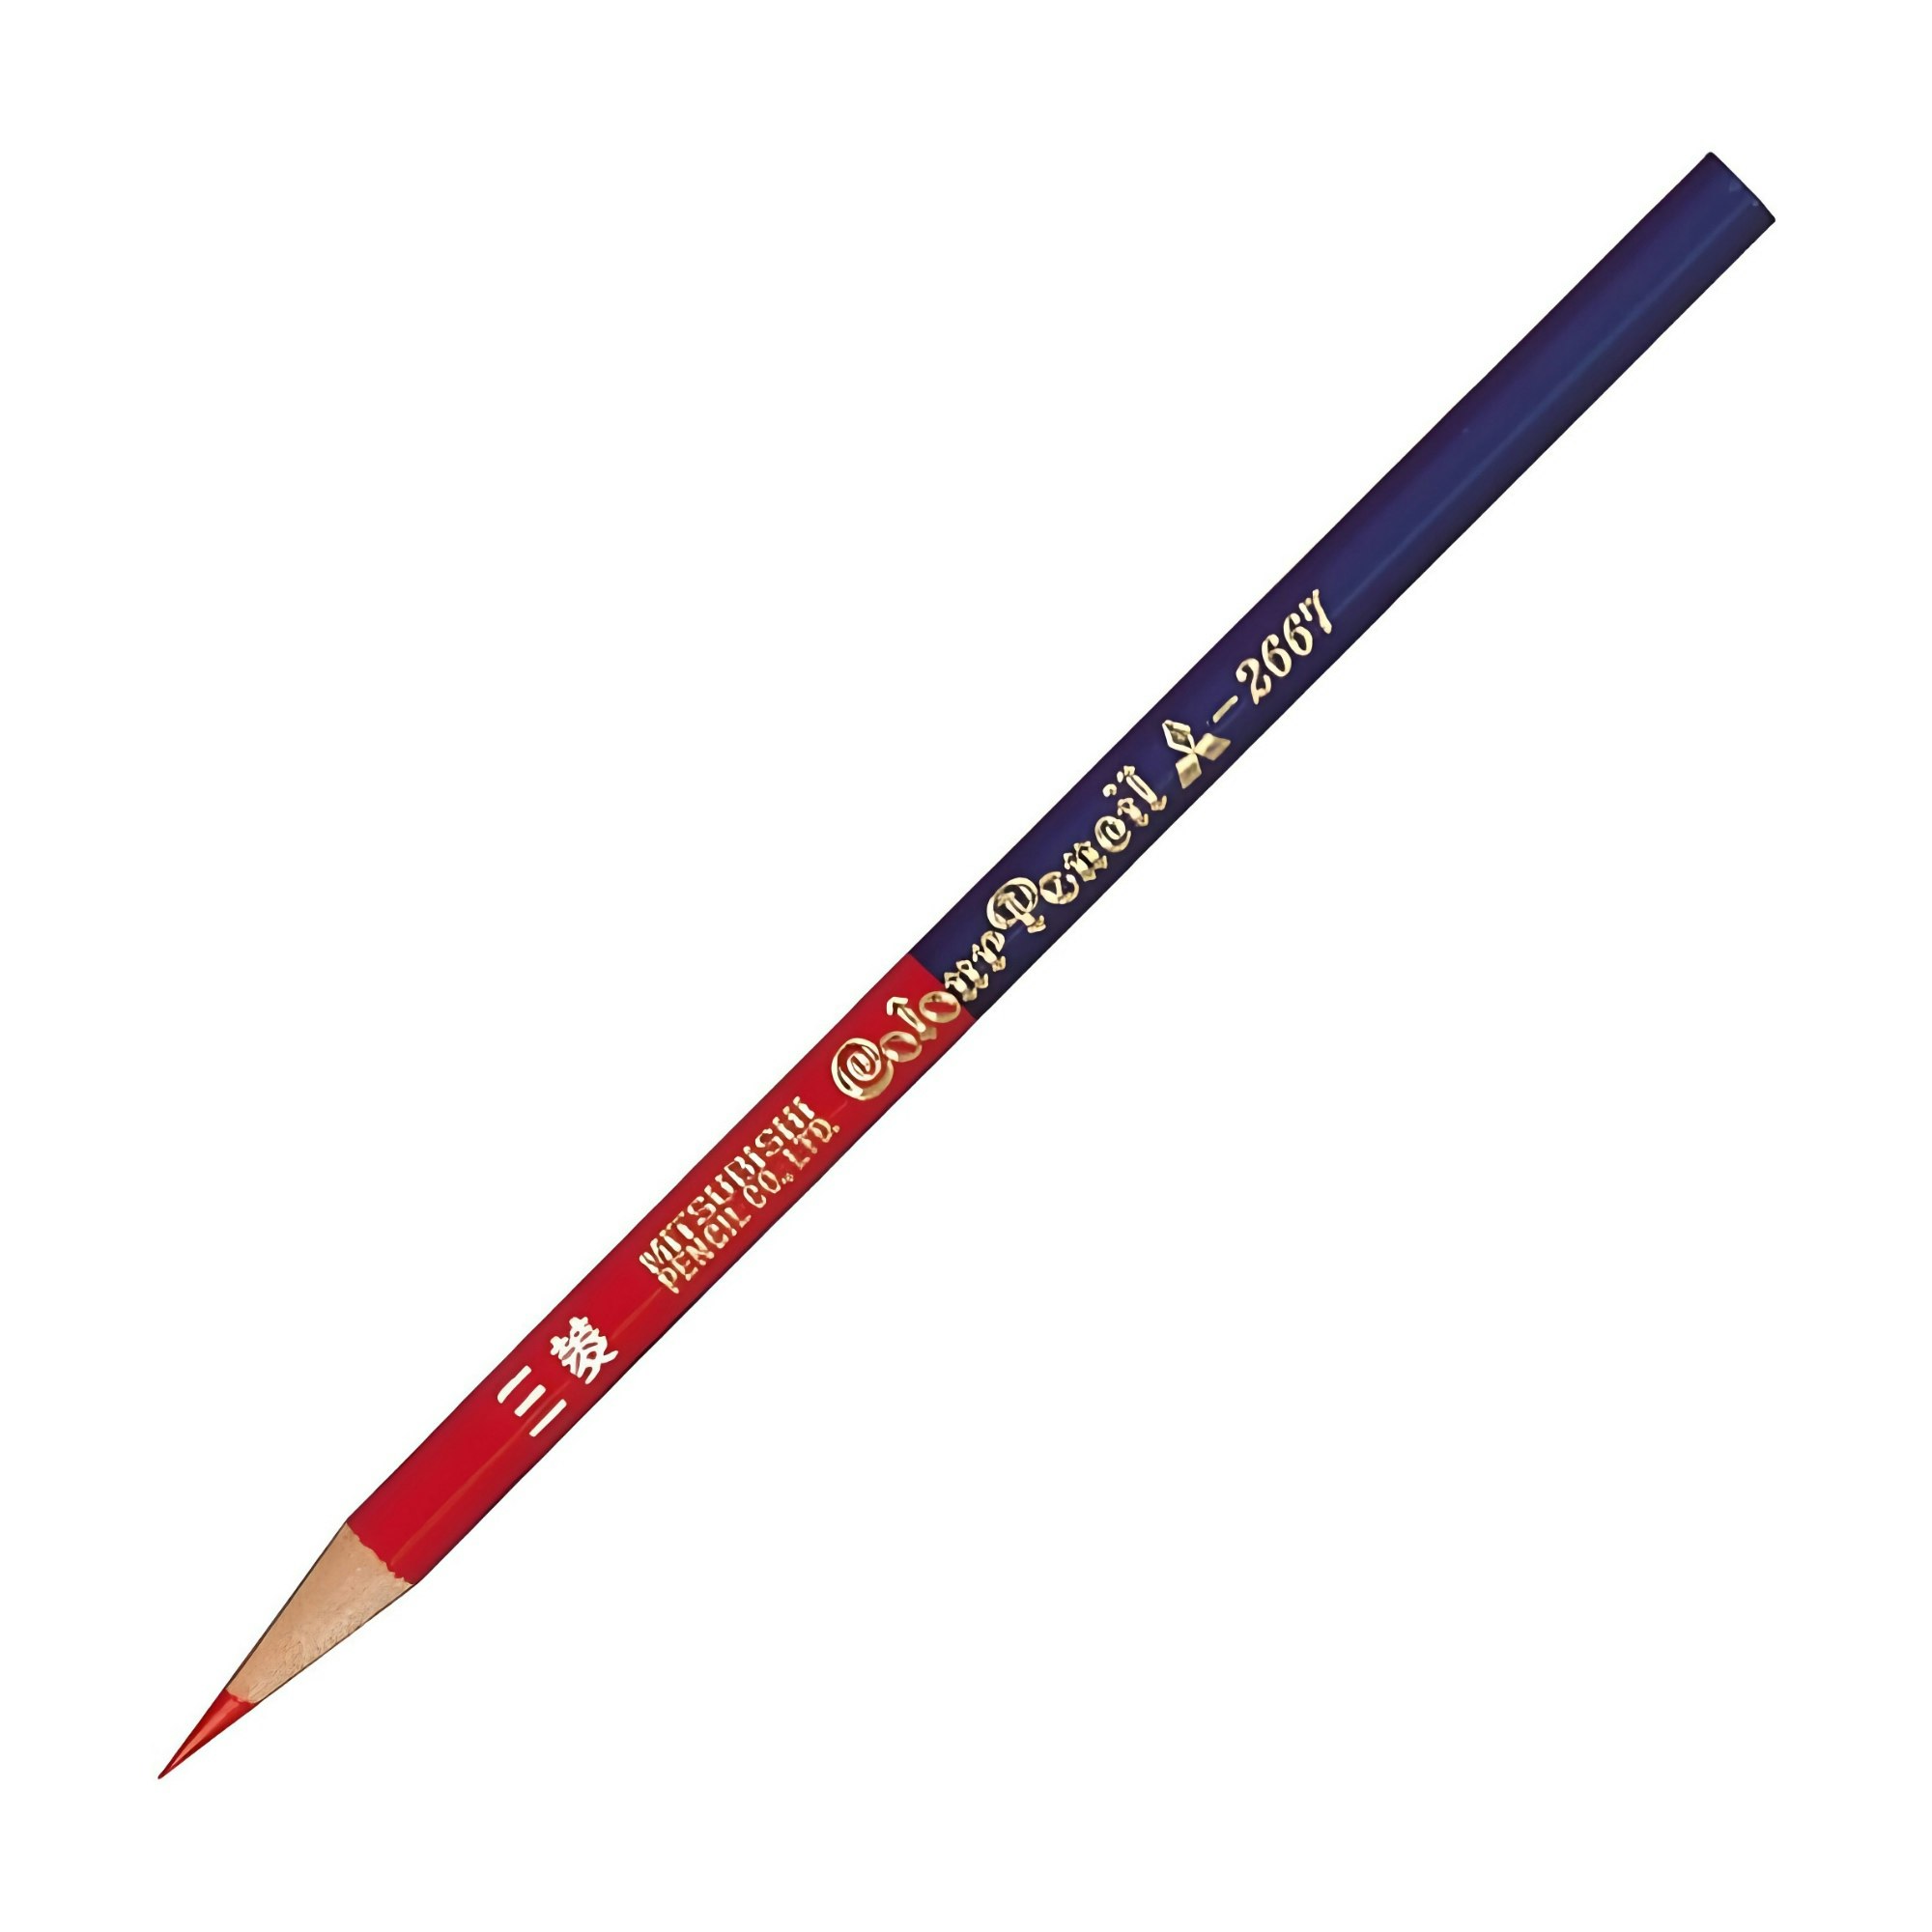 Uni Mitsubishi Colored Pencils Vermilion and Prussian Blue (Pack of 12)